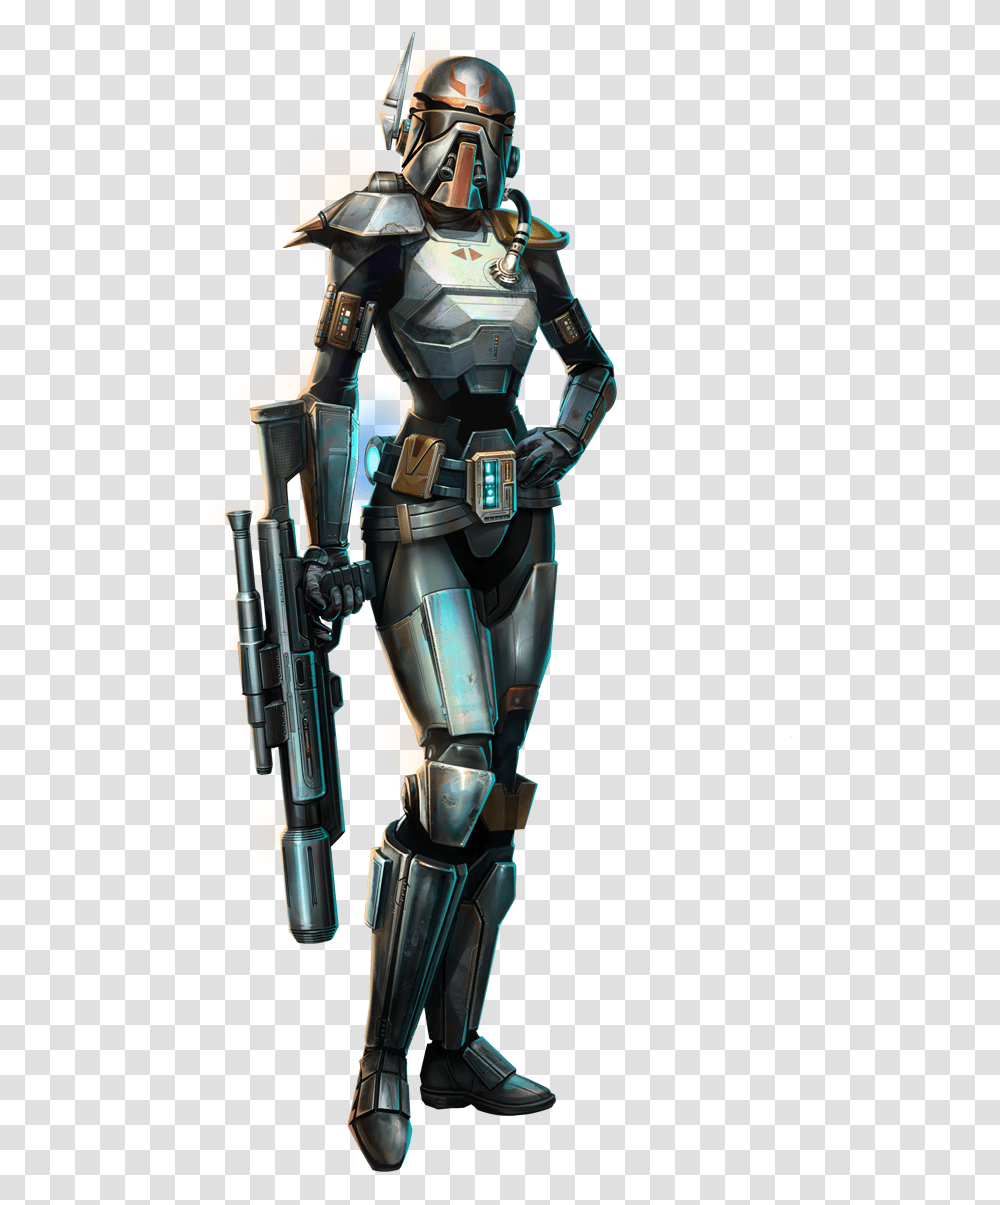 Star Wars The Old Republic Bounty Hunter Screen Shots Old Republic Bounty Hunter, Toy, Helmet, Clothing, Apparel Transparent Png